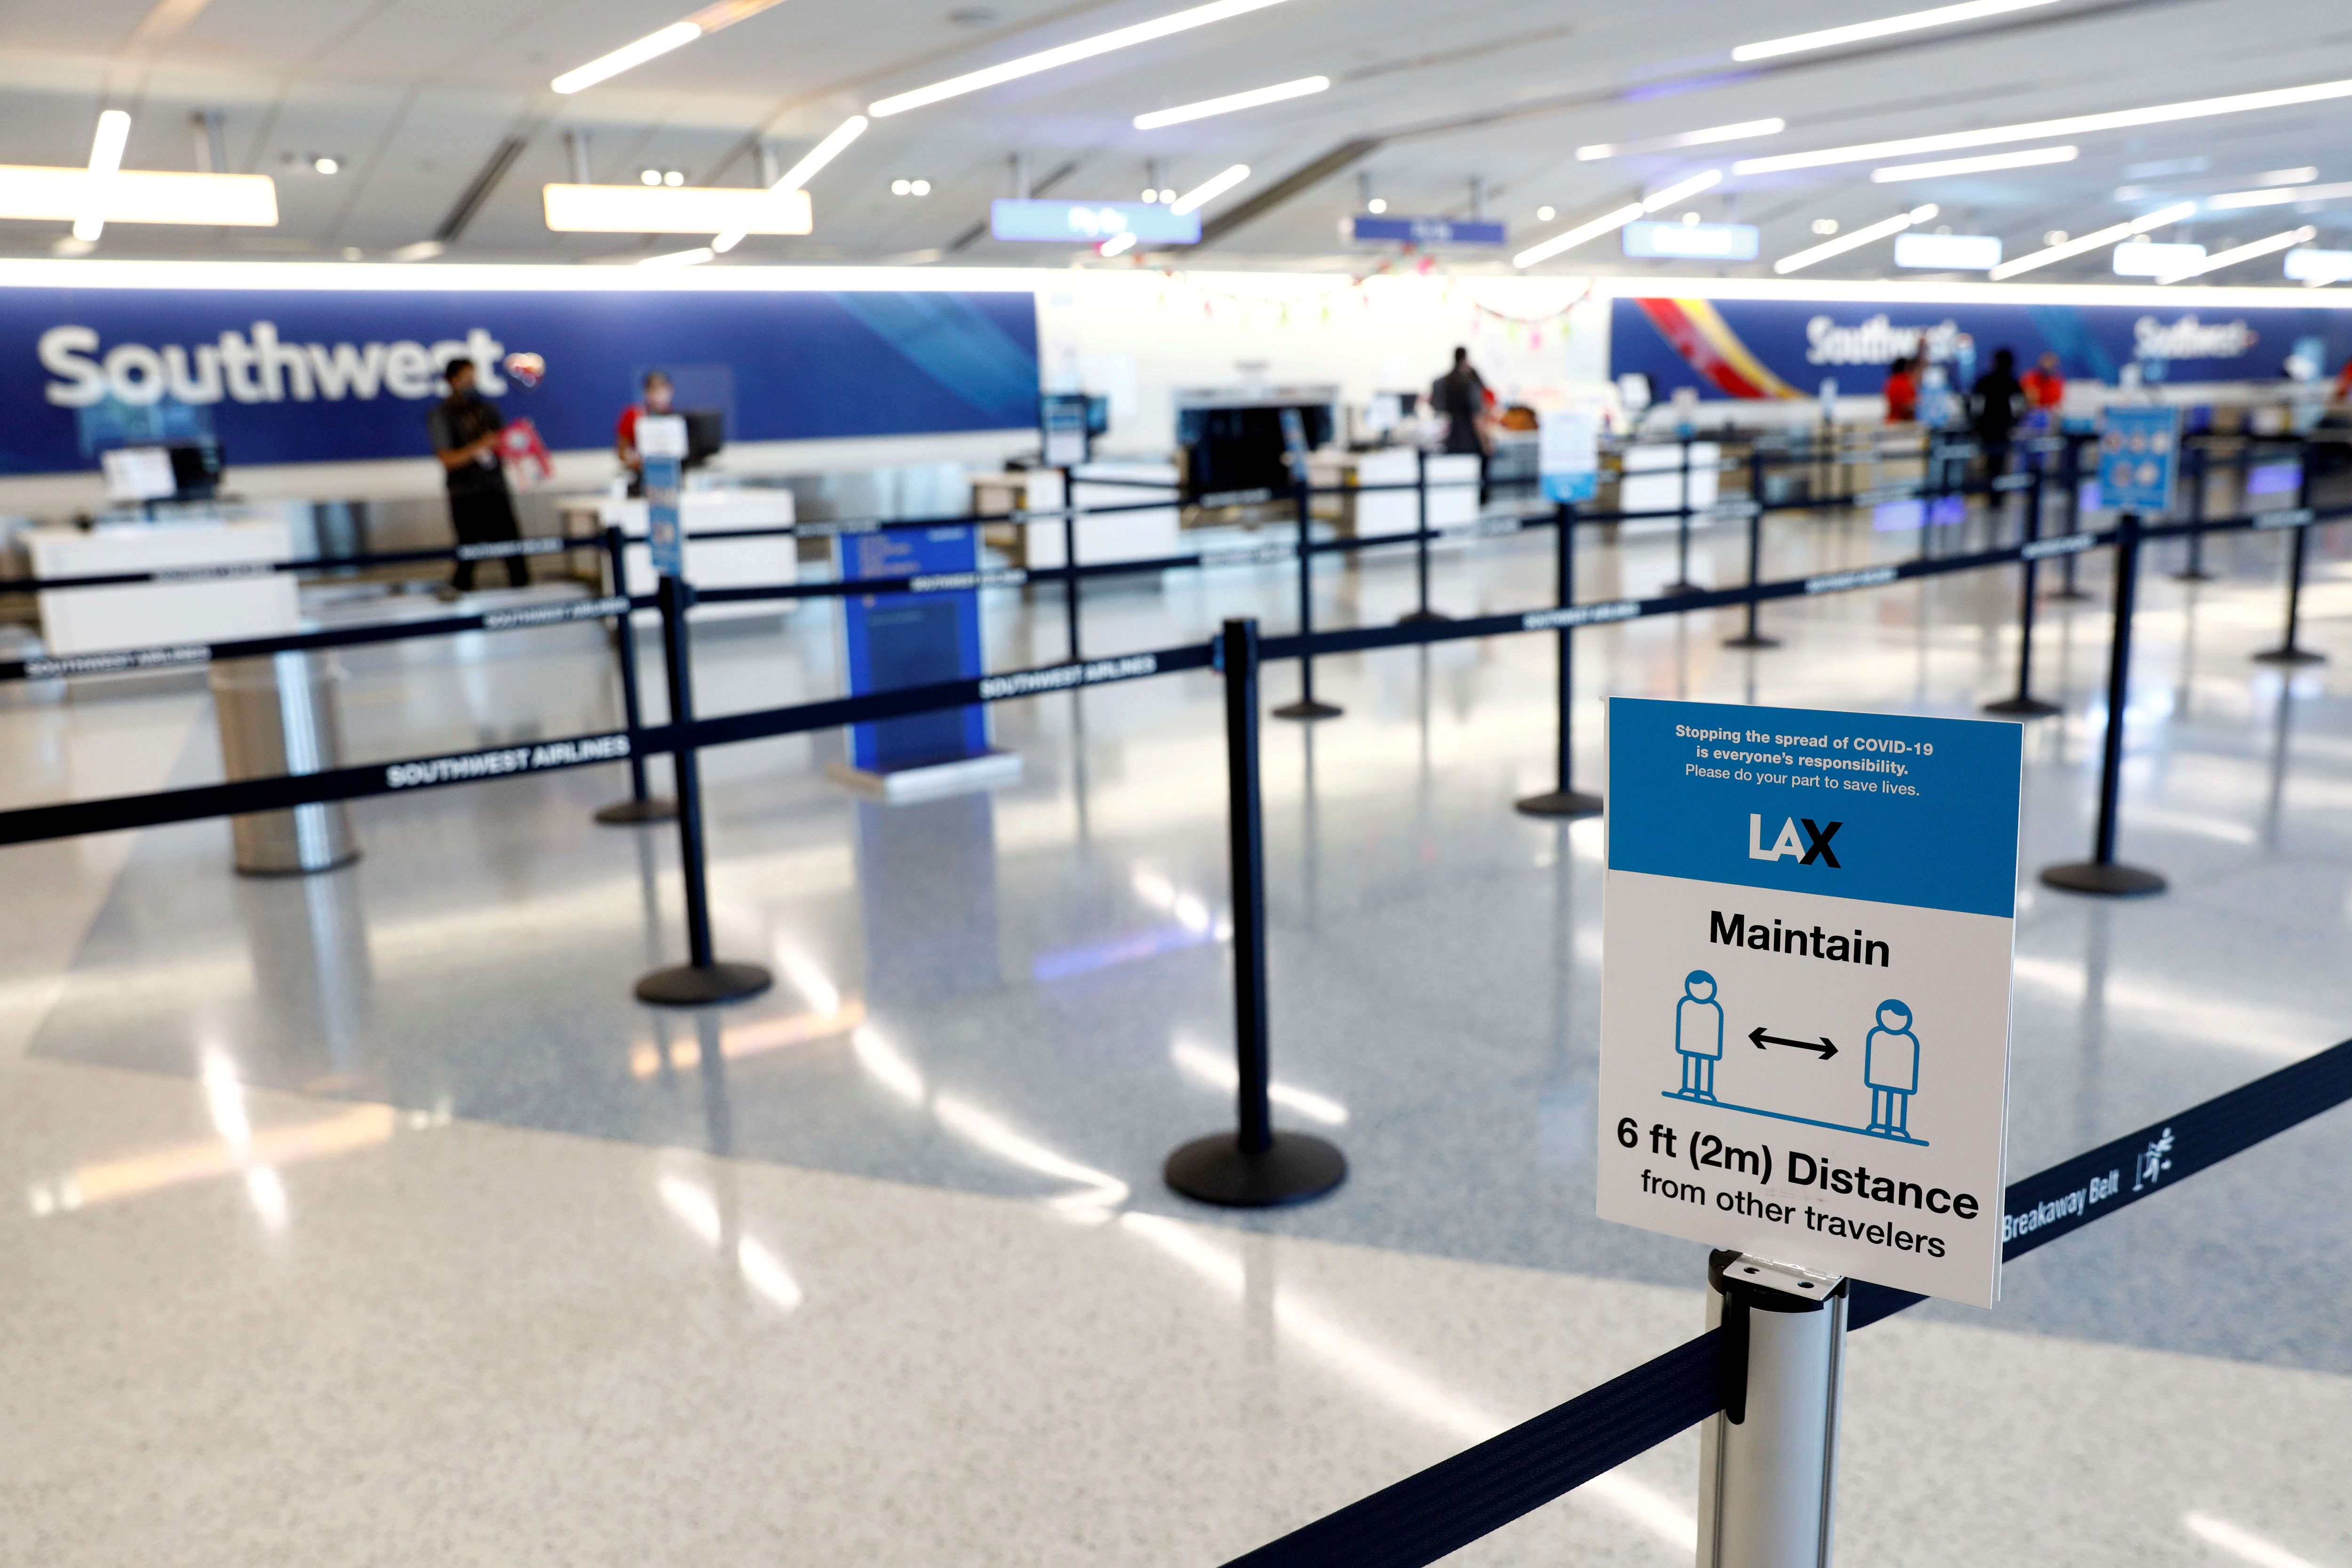 A social distancing sign is displayed at a check-in area for Southwest Airlines Co. at Los Angeles International Airport during the outbreak of the coronavirus disease in Los Angeles, California, U.S., May 23, 2020. REUTERS/Patrick T. Fallon